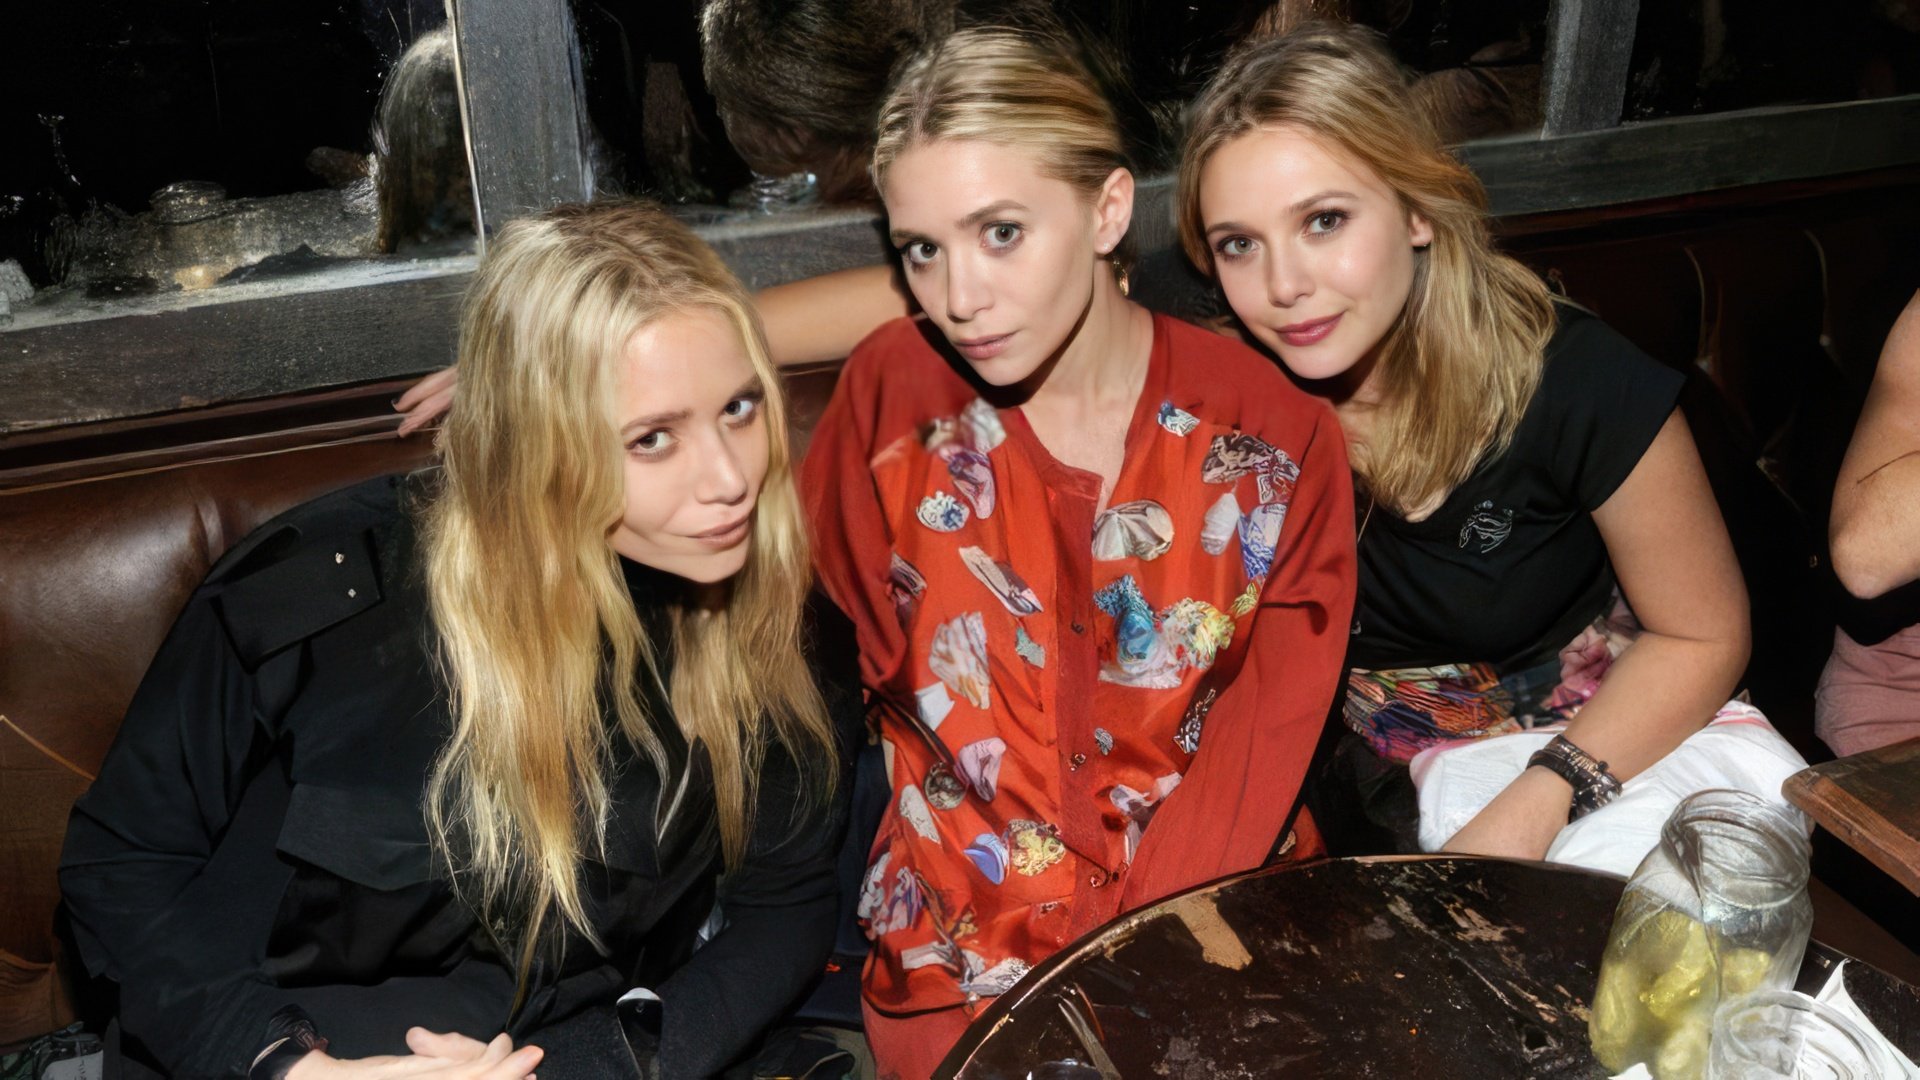 The Olsen sisters have grown up